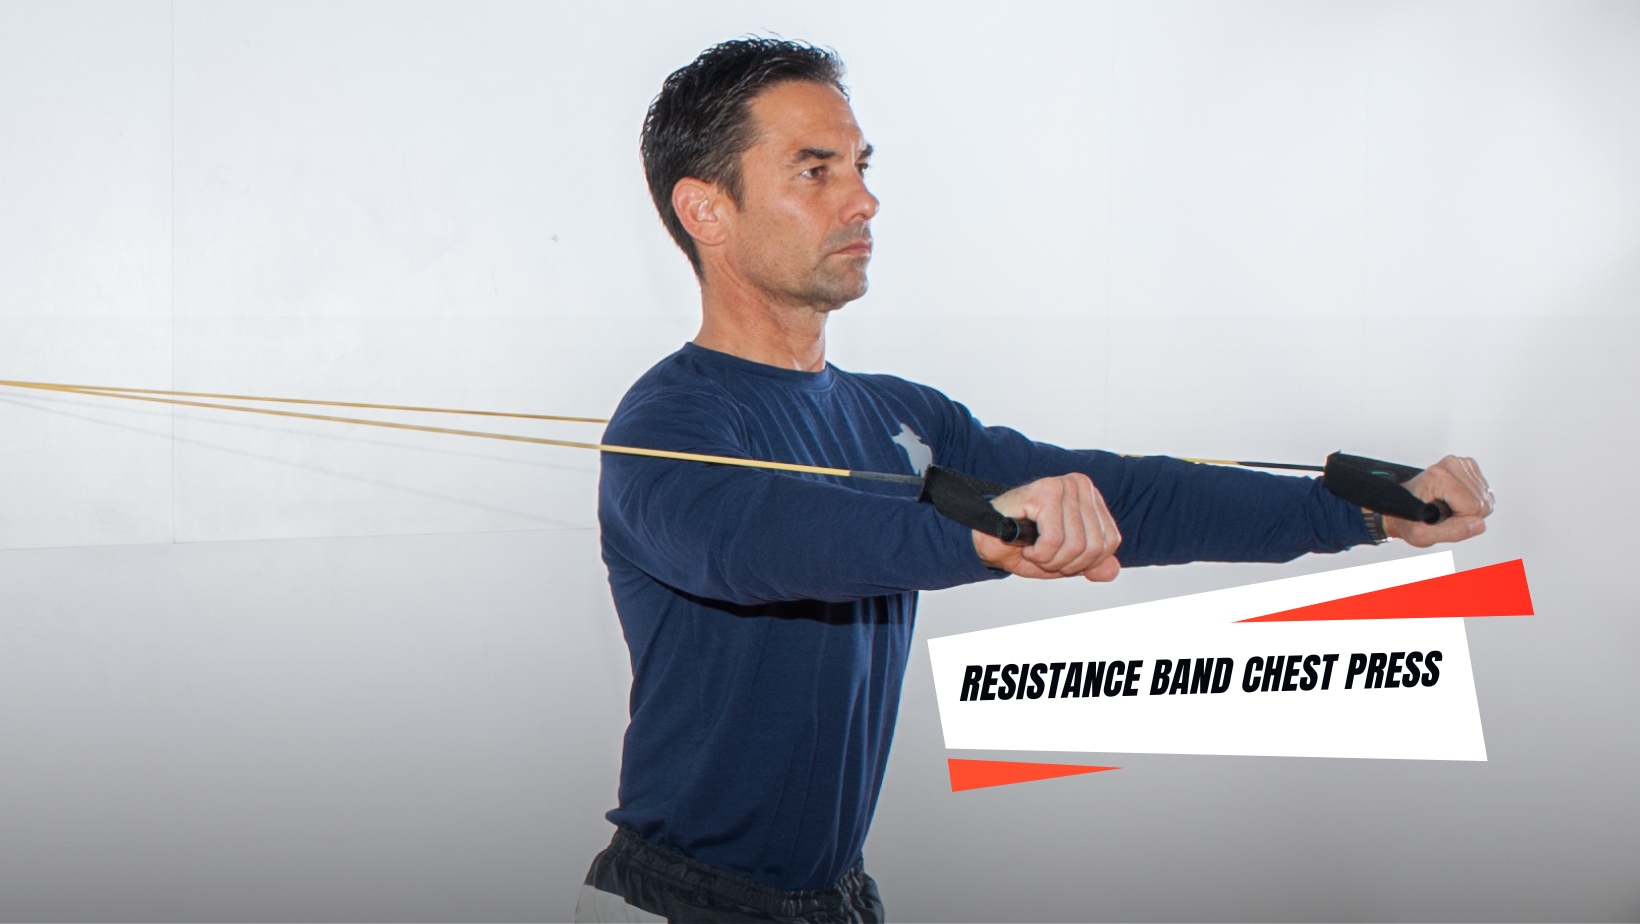 Resistance Band Chest Press